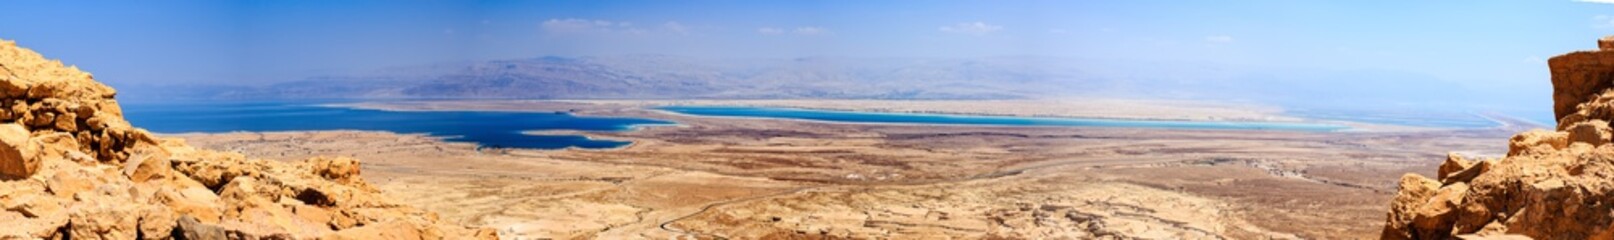 Panoramic lanscape of Judaean Desert and Dead Sea. View from Massada fortress